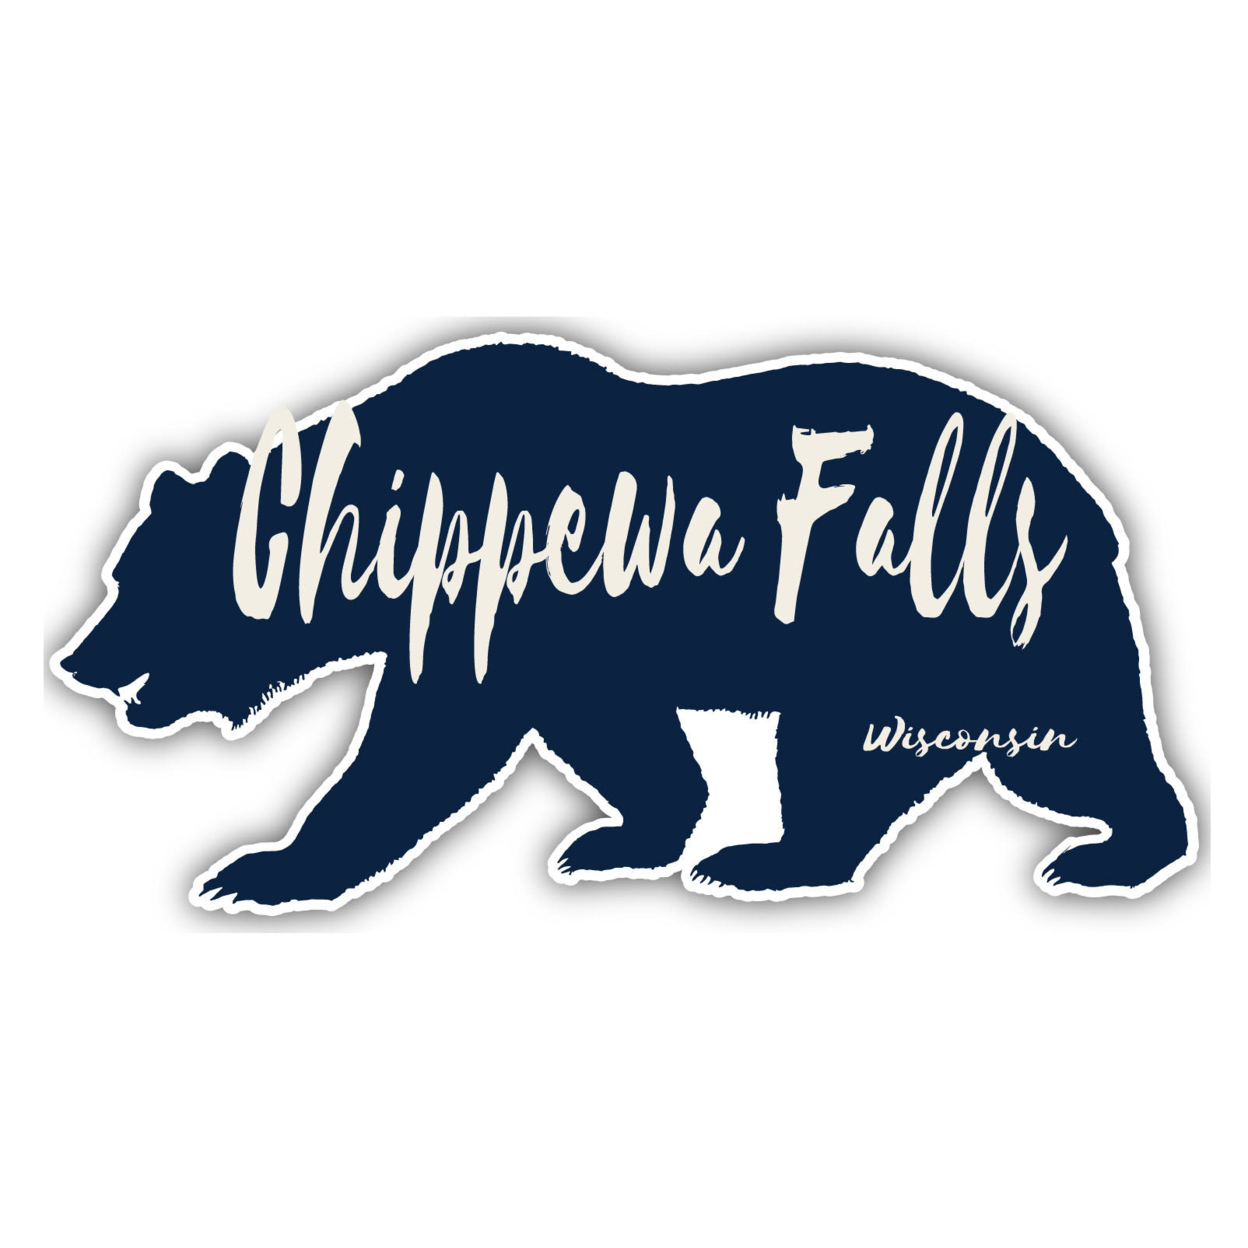 Chippewa Falls Wisconsin Souvenir Decorative Stickers (Choose Theme And Size) - 4-Pack, 10-Inch, Bear